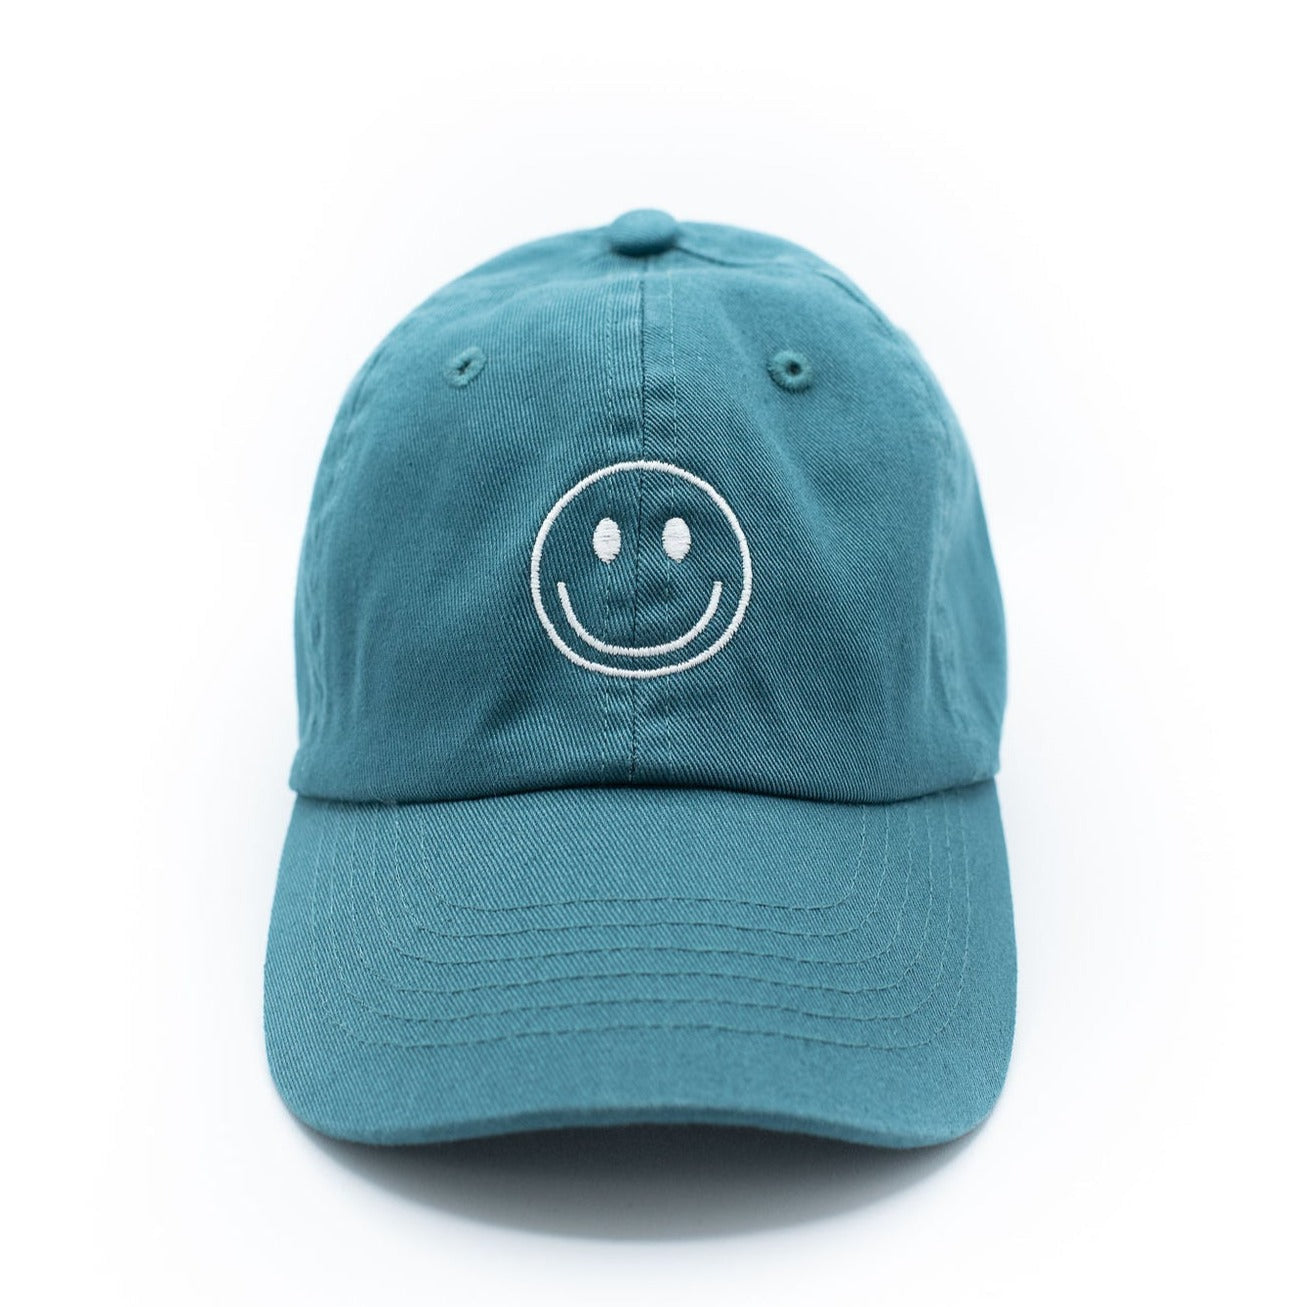 smiley face hat in teal